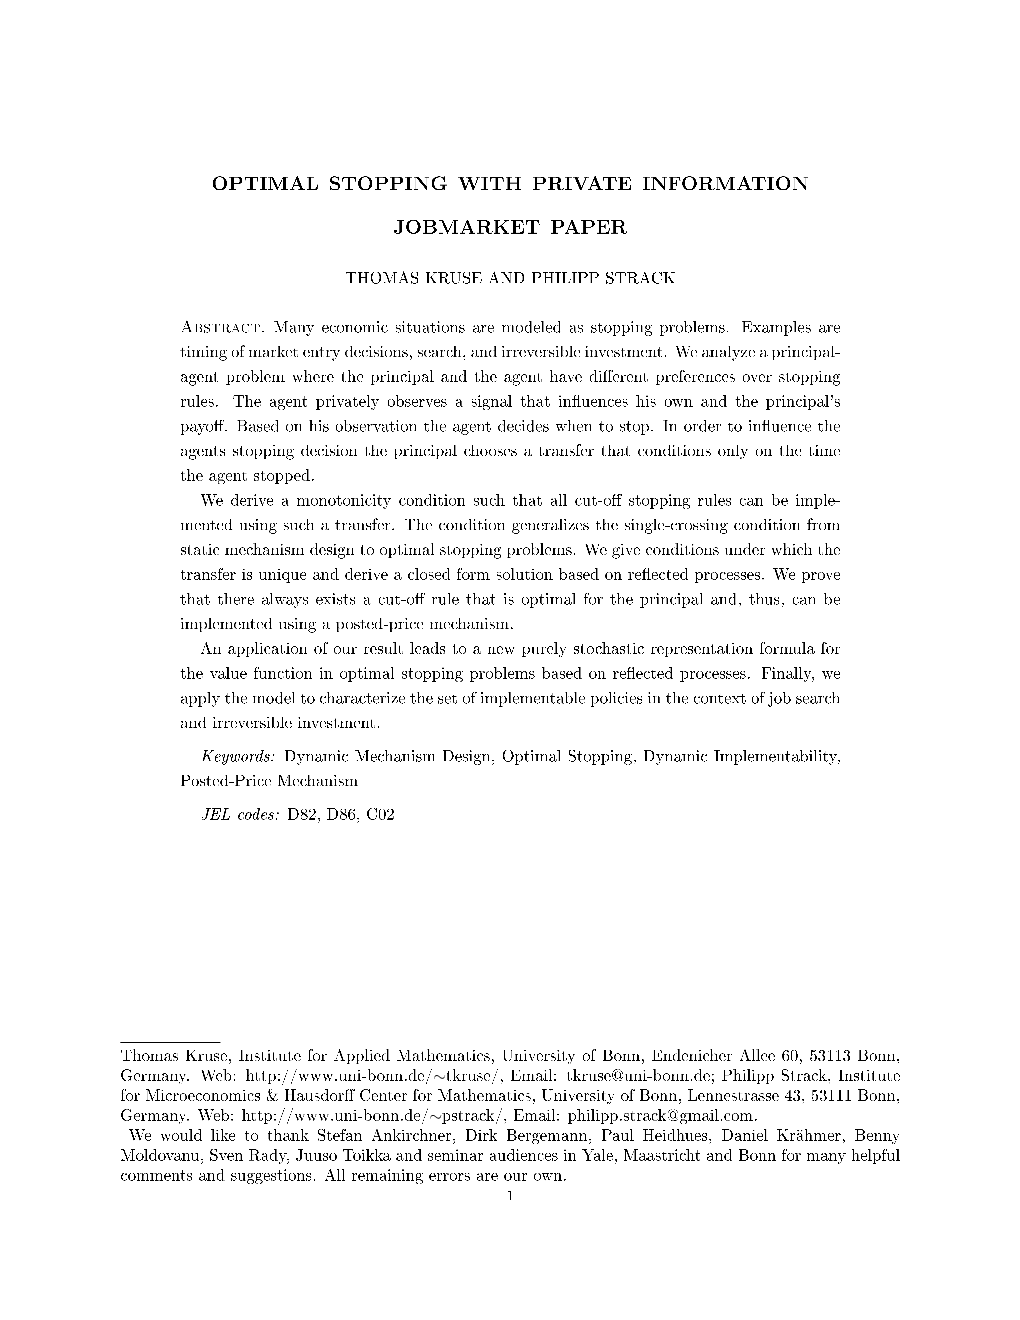 Optimal Stopping with Private Information Jobmarket Paper